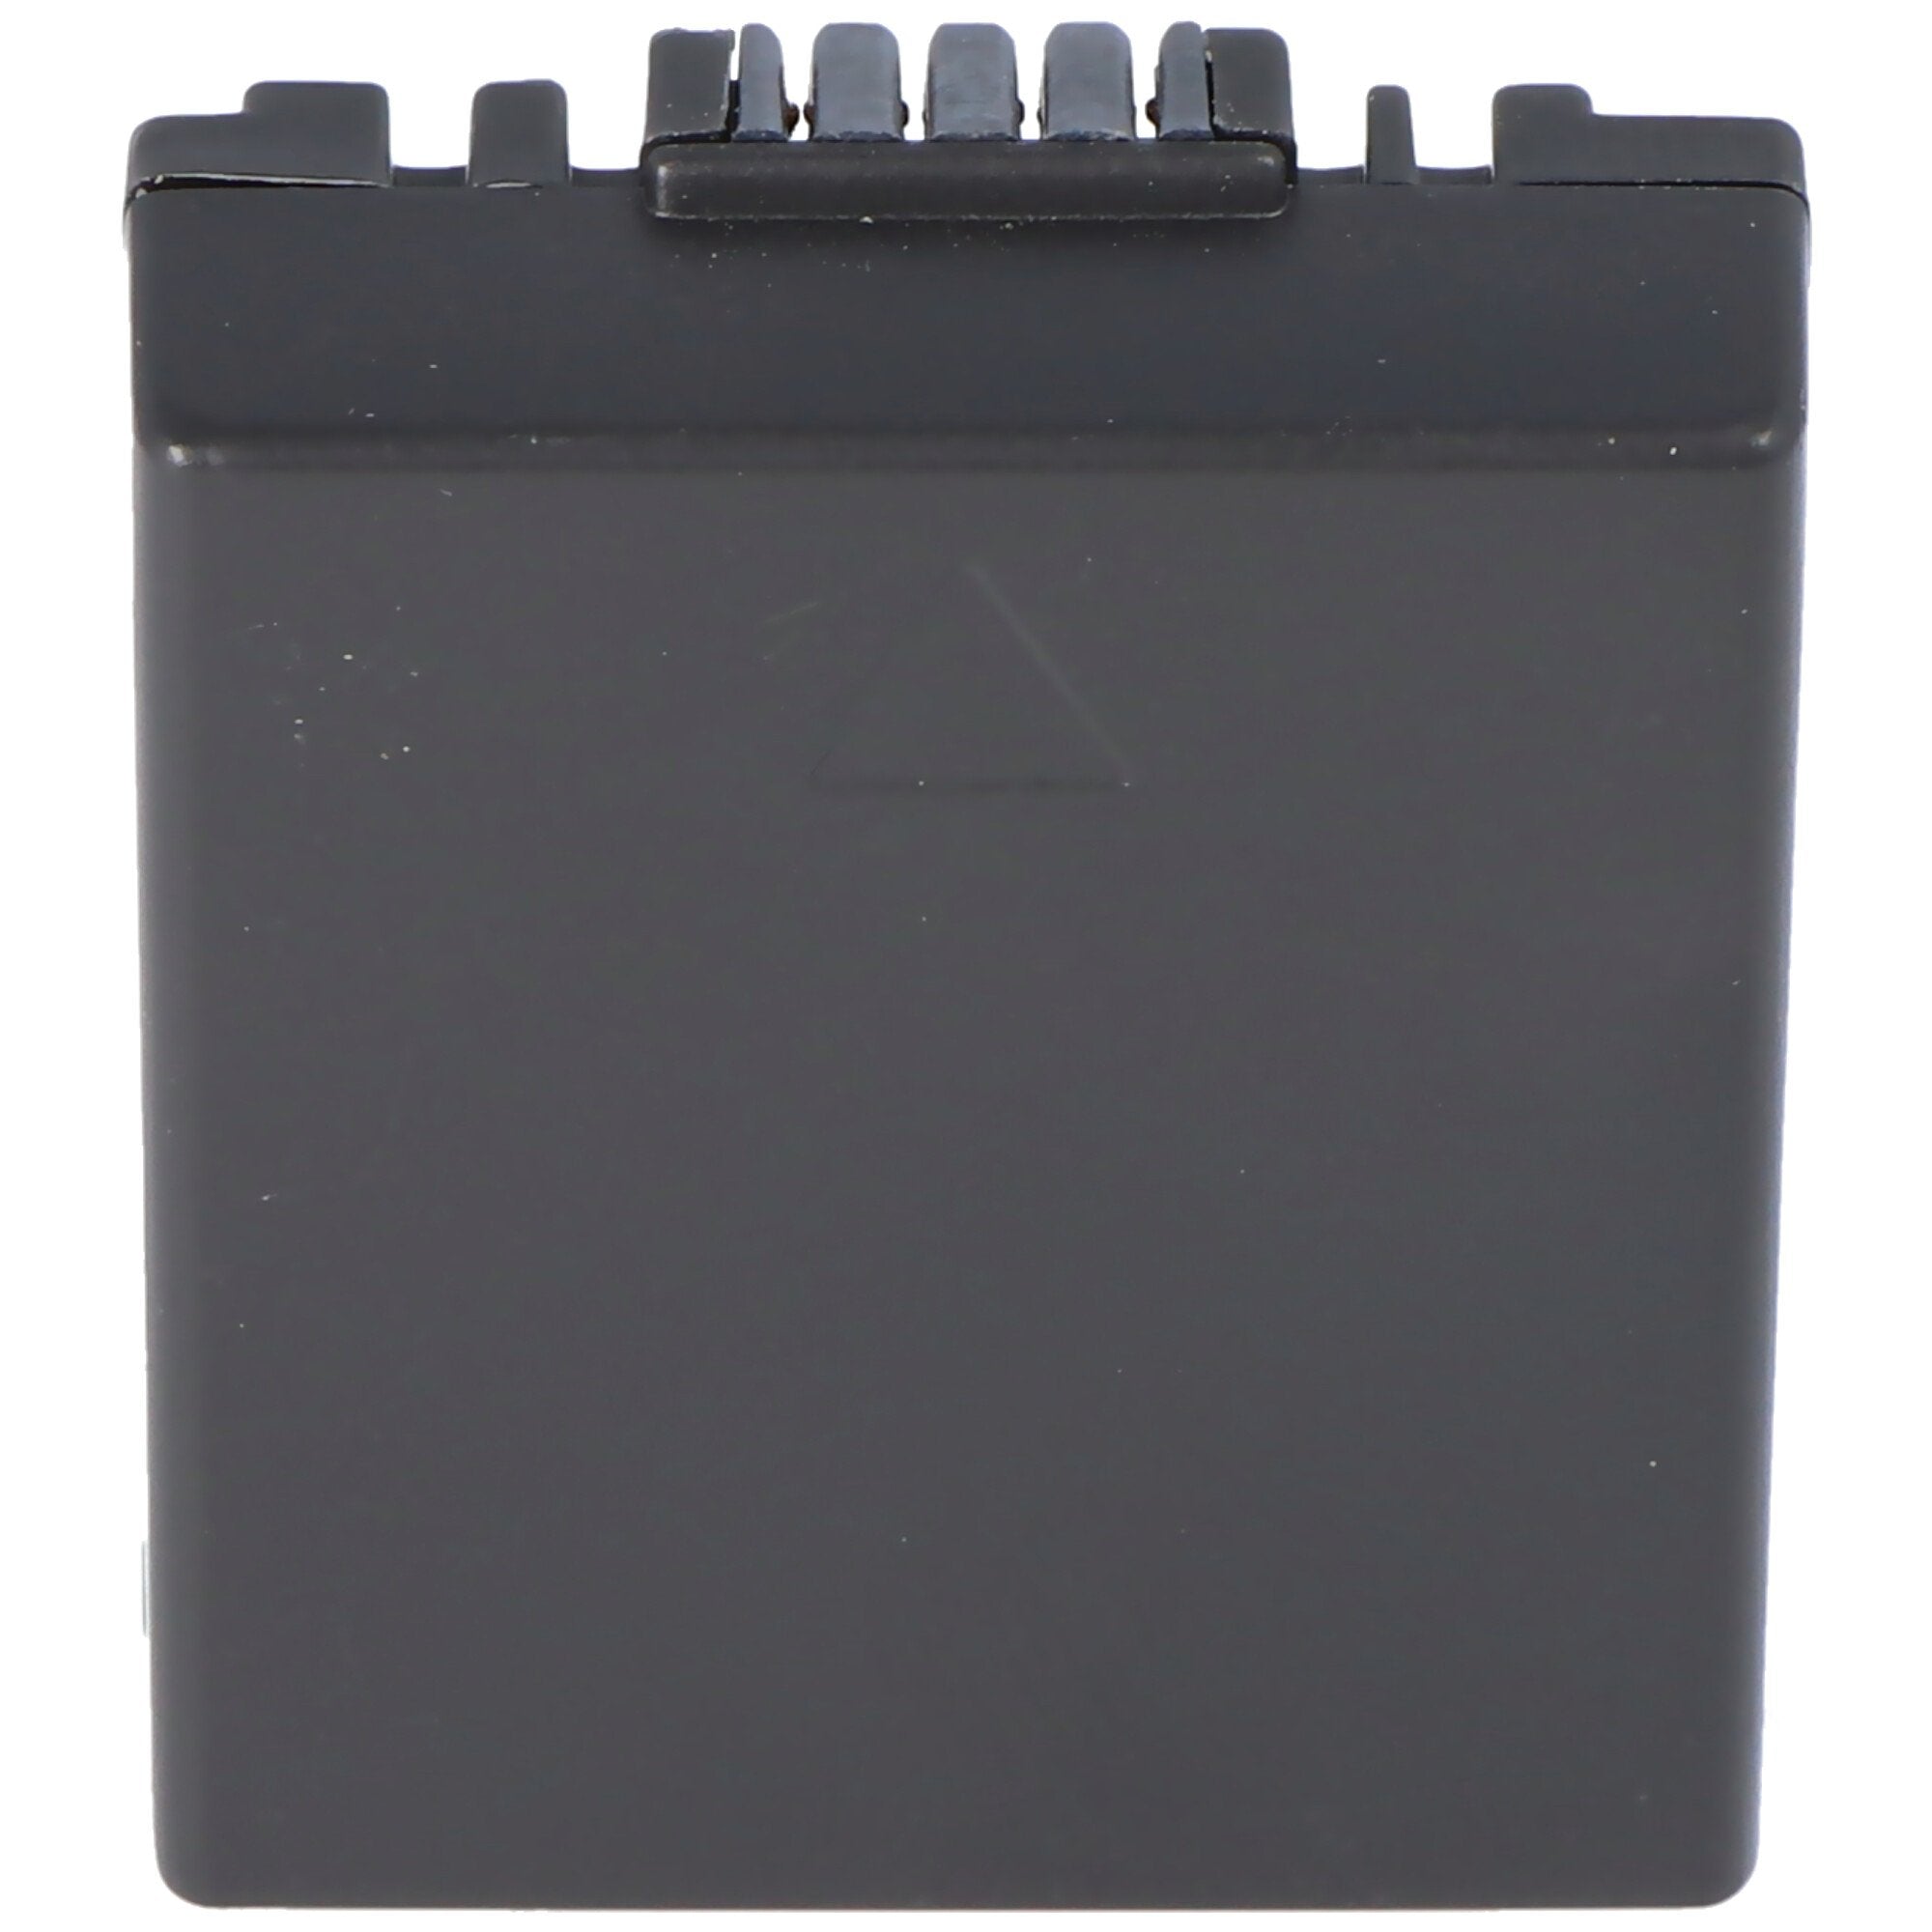 AccuCell battery suitable for Panasonic CGA-S002, CGR-S002, DMW-BM7